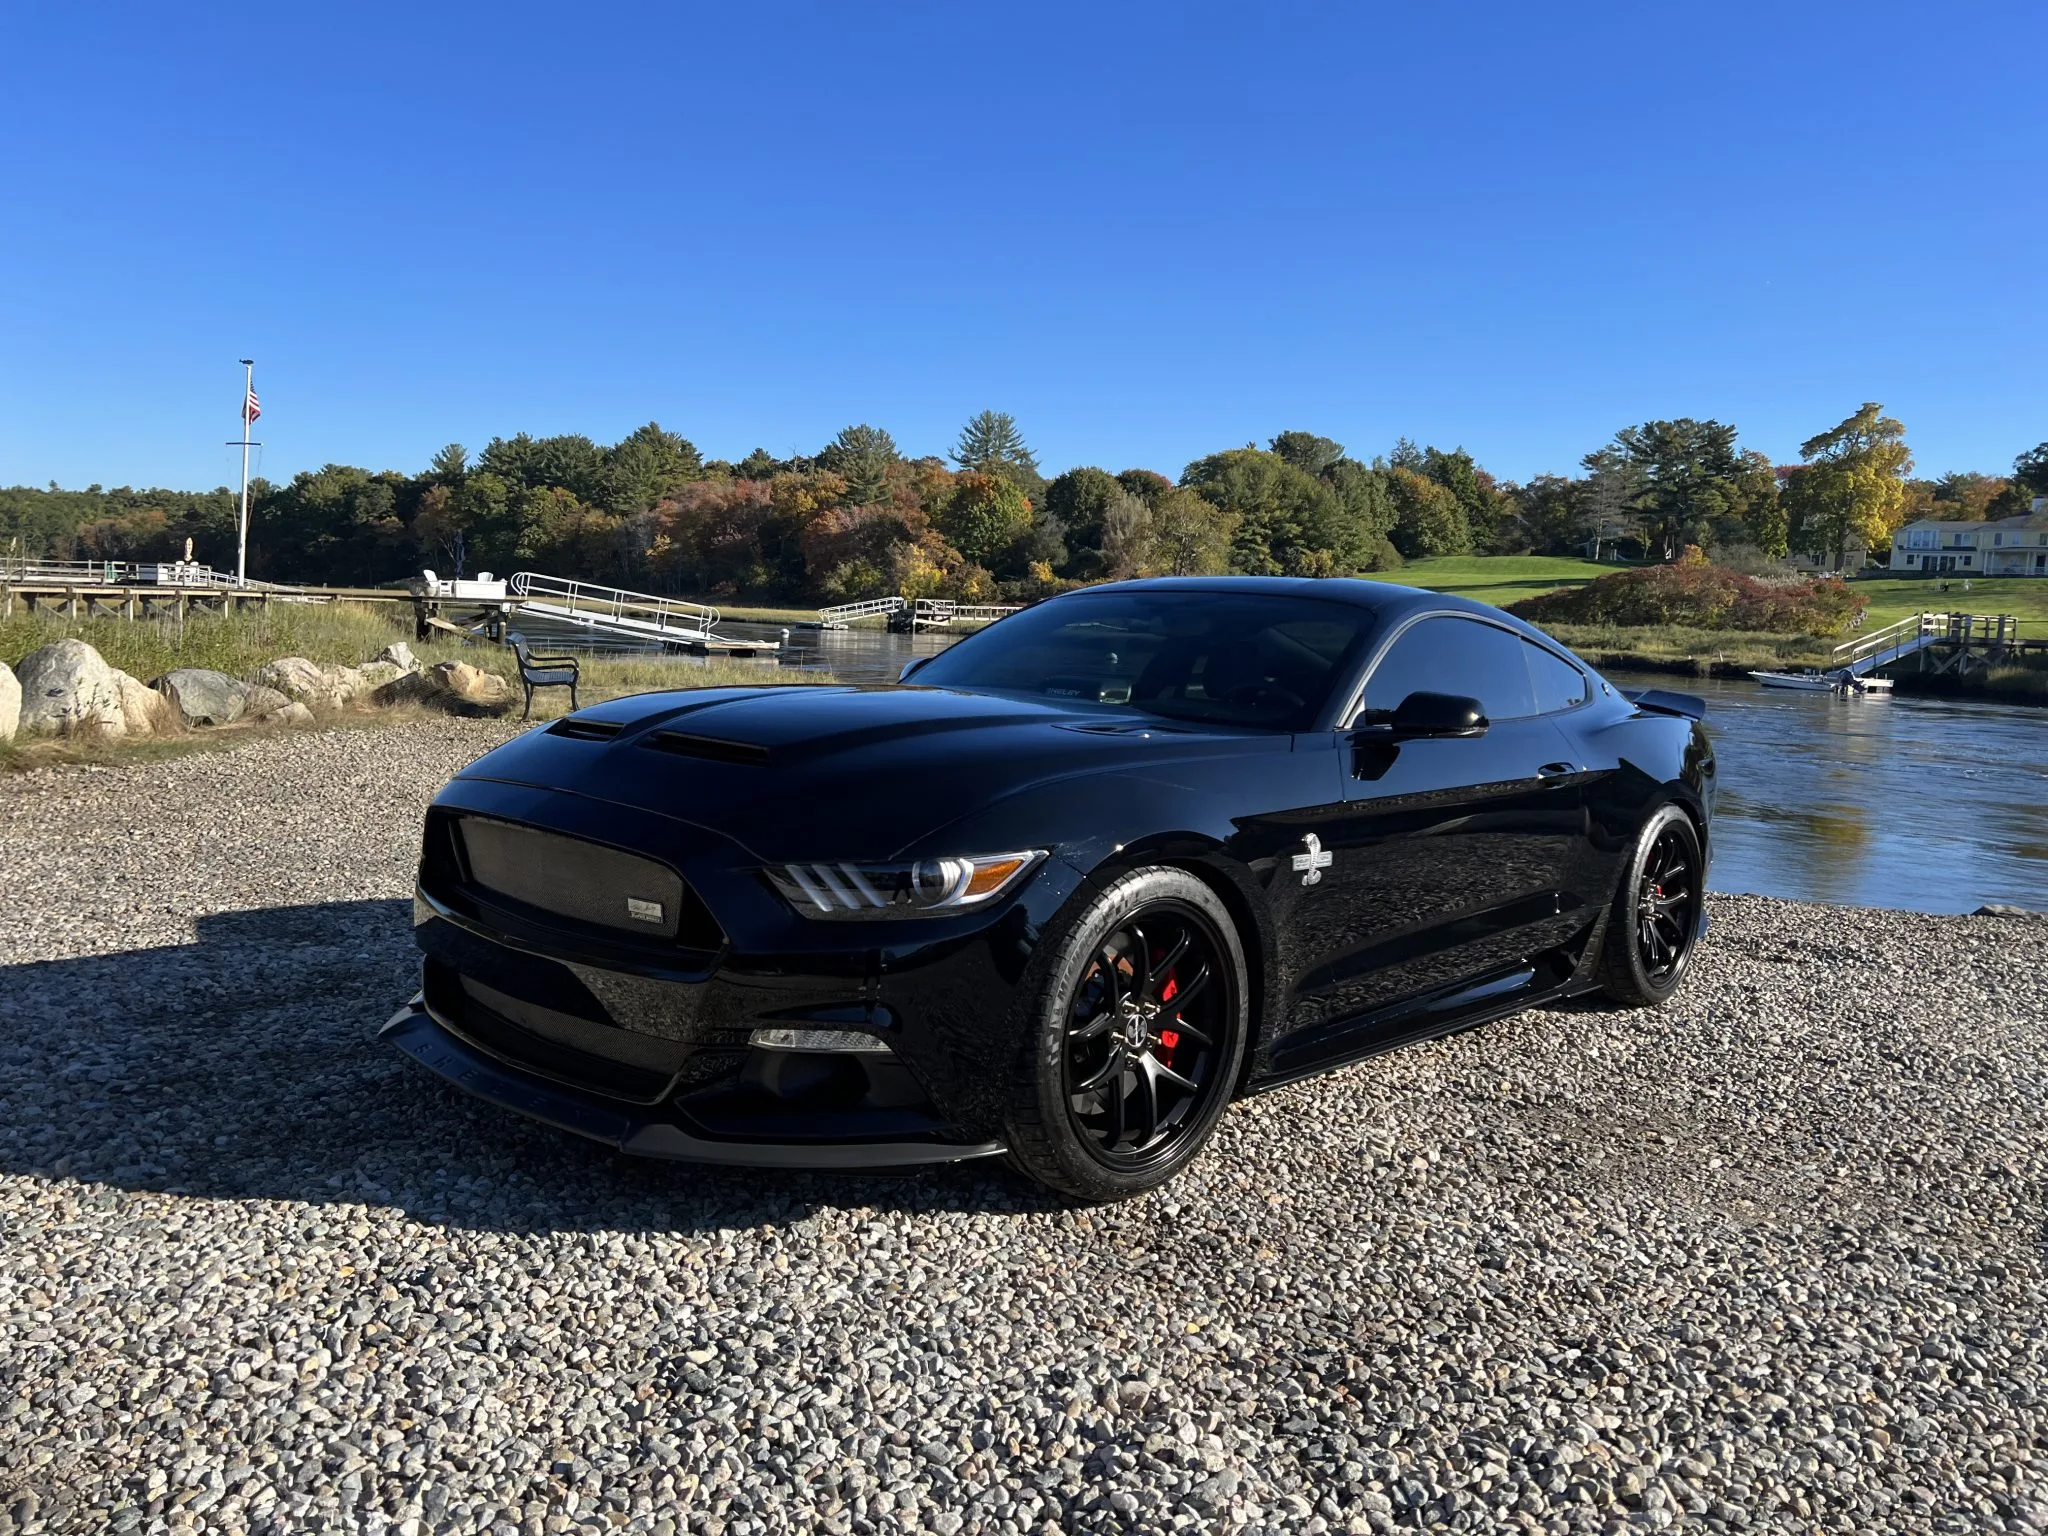 Mustang Of The Day: 2017 Ford Mustang Shelby Super Snake